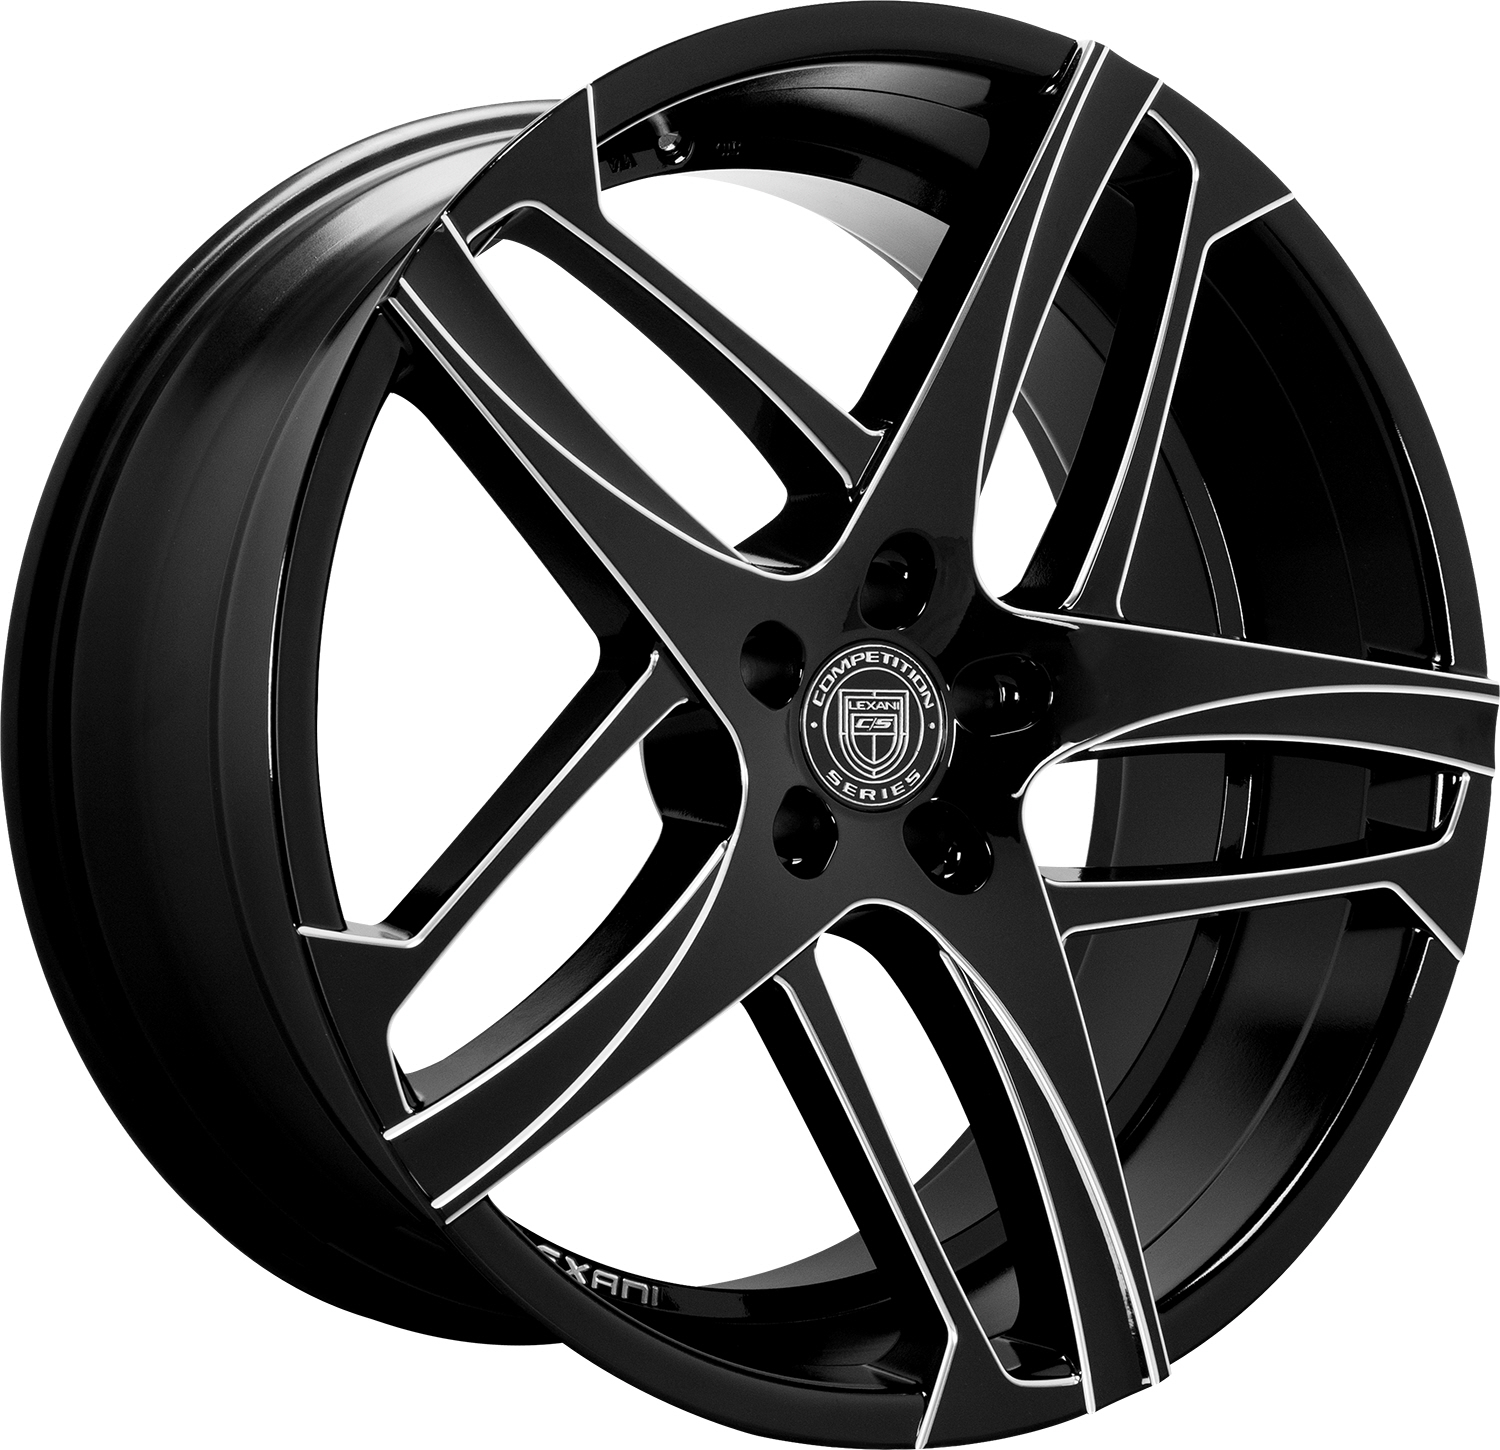 668 - BAVARIA  WHEELS AND RIMS PACKAGES